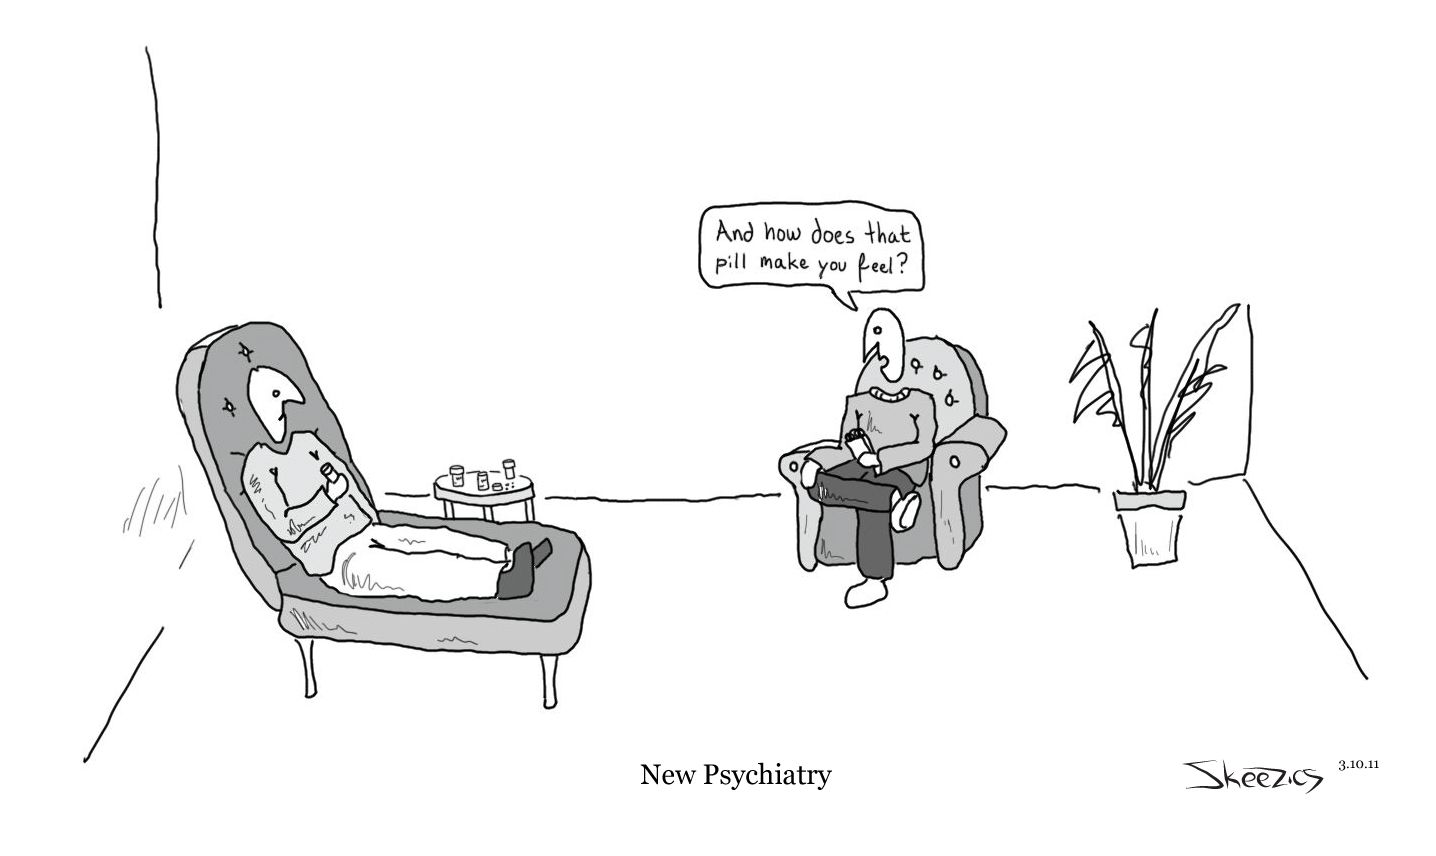 Famous quotes about 'Psychiatry' Quotes 2019